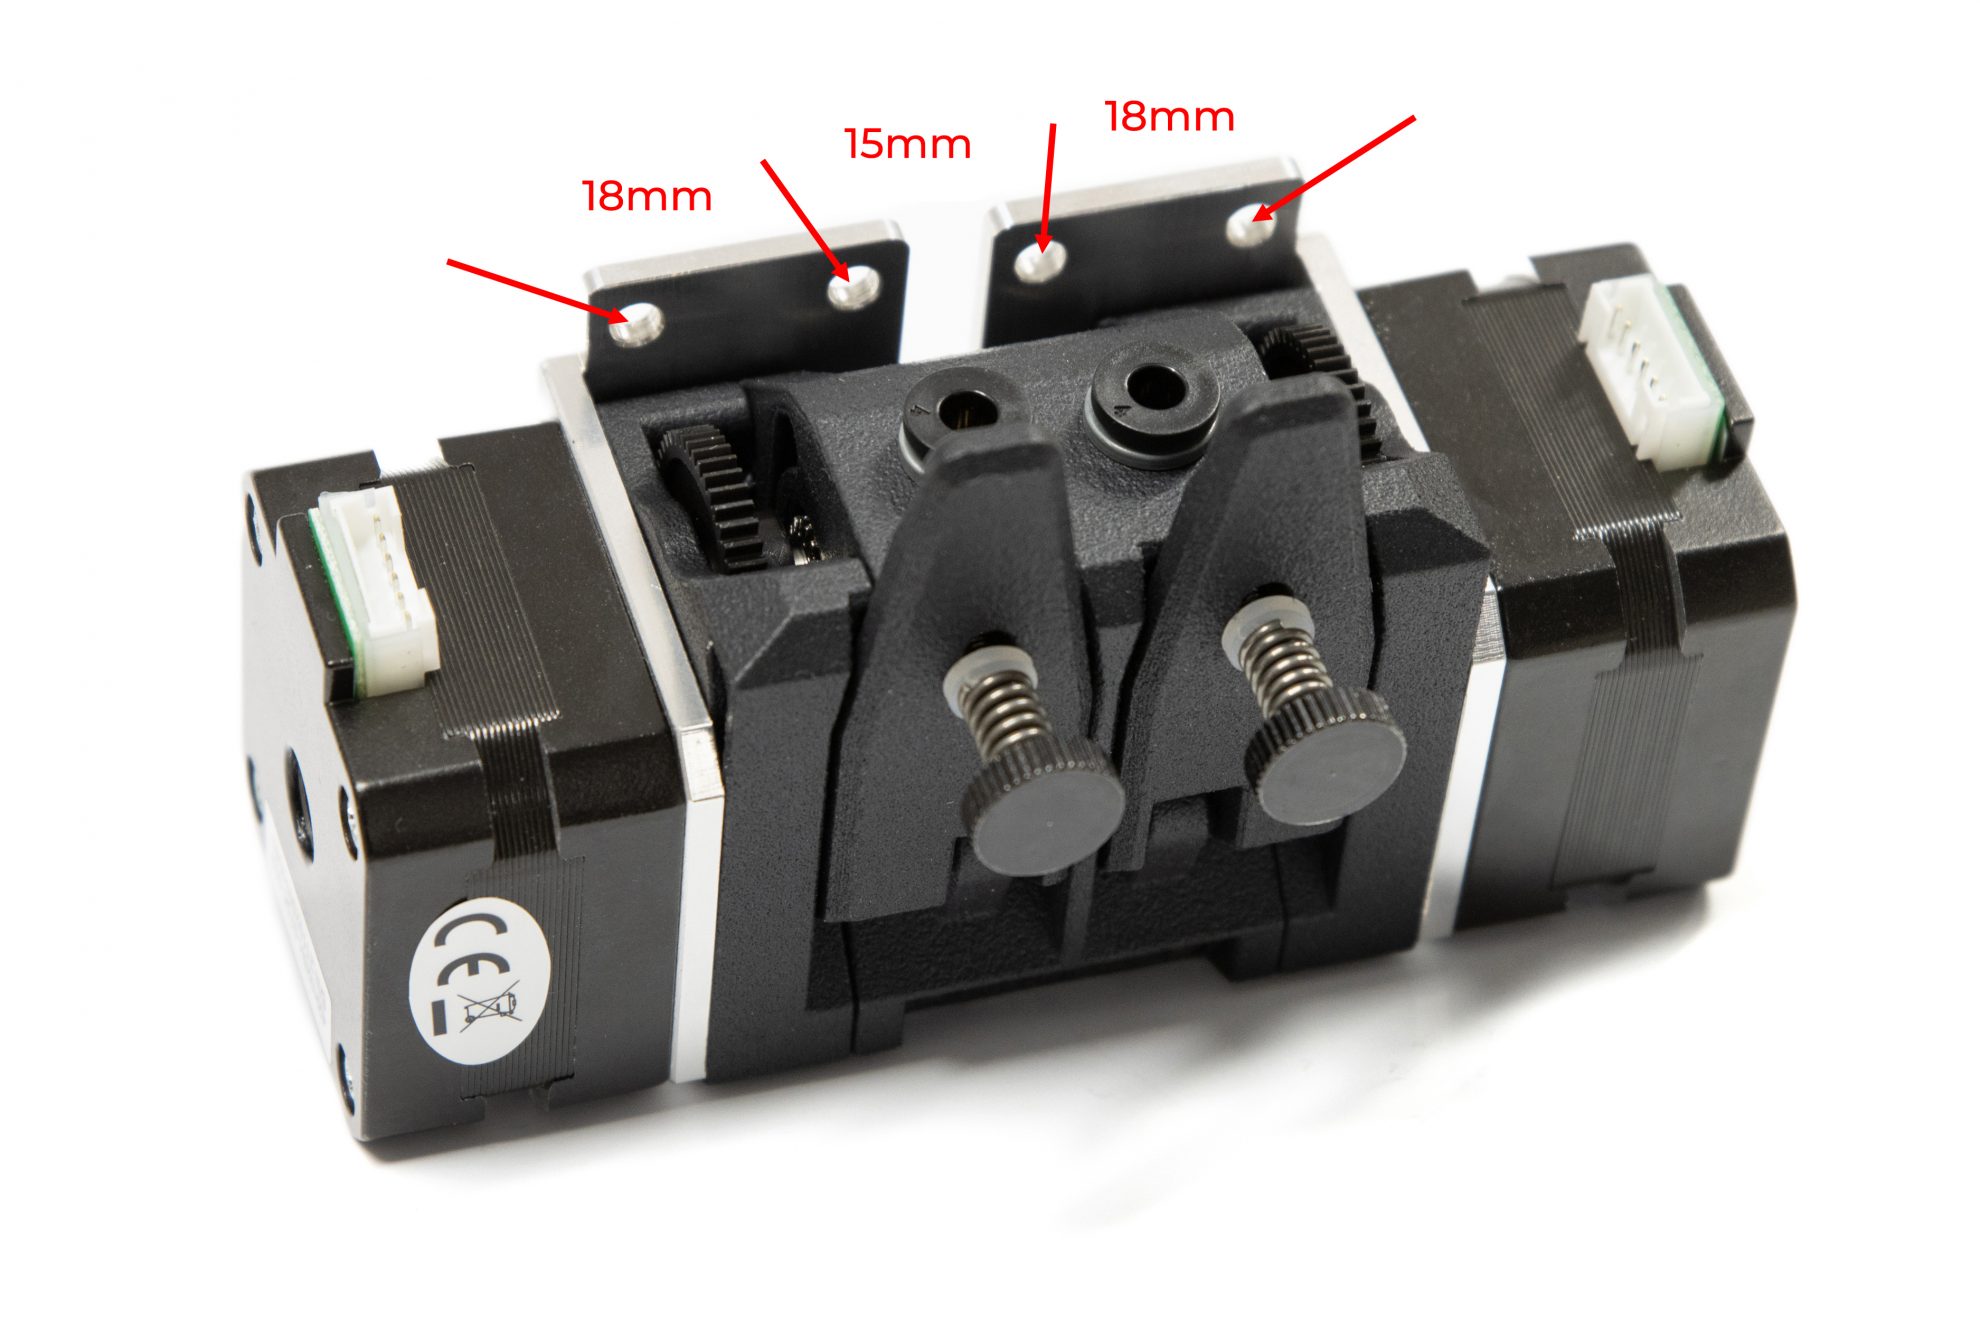 BMG-X2-M extruder with BMG Alu Mount Plates